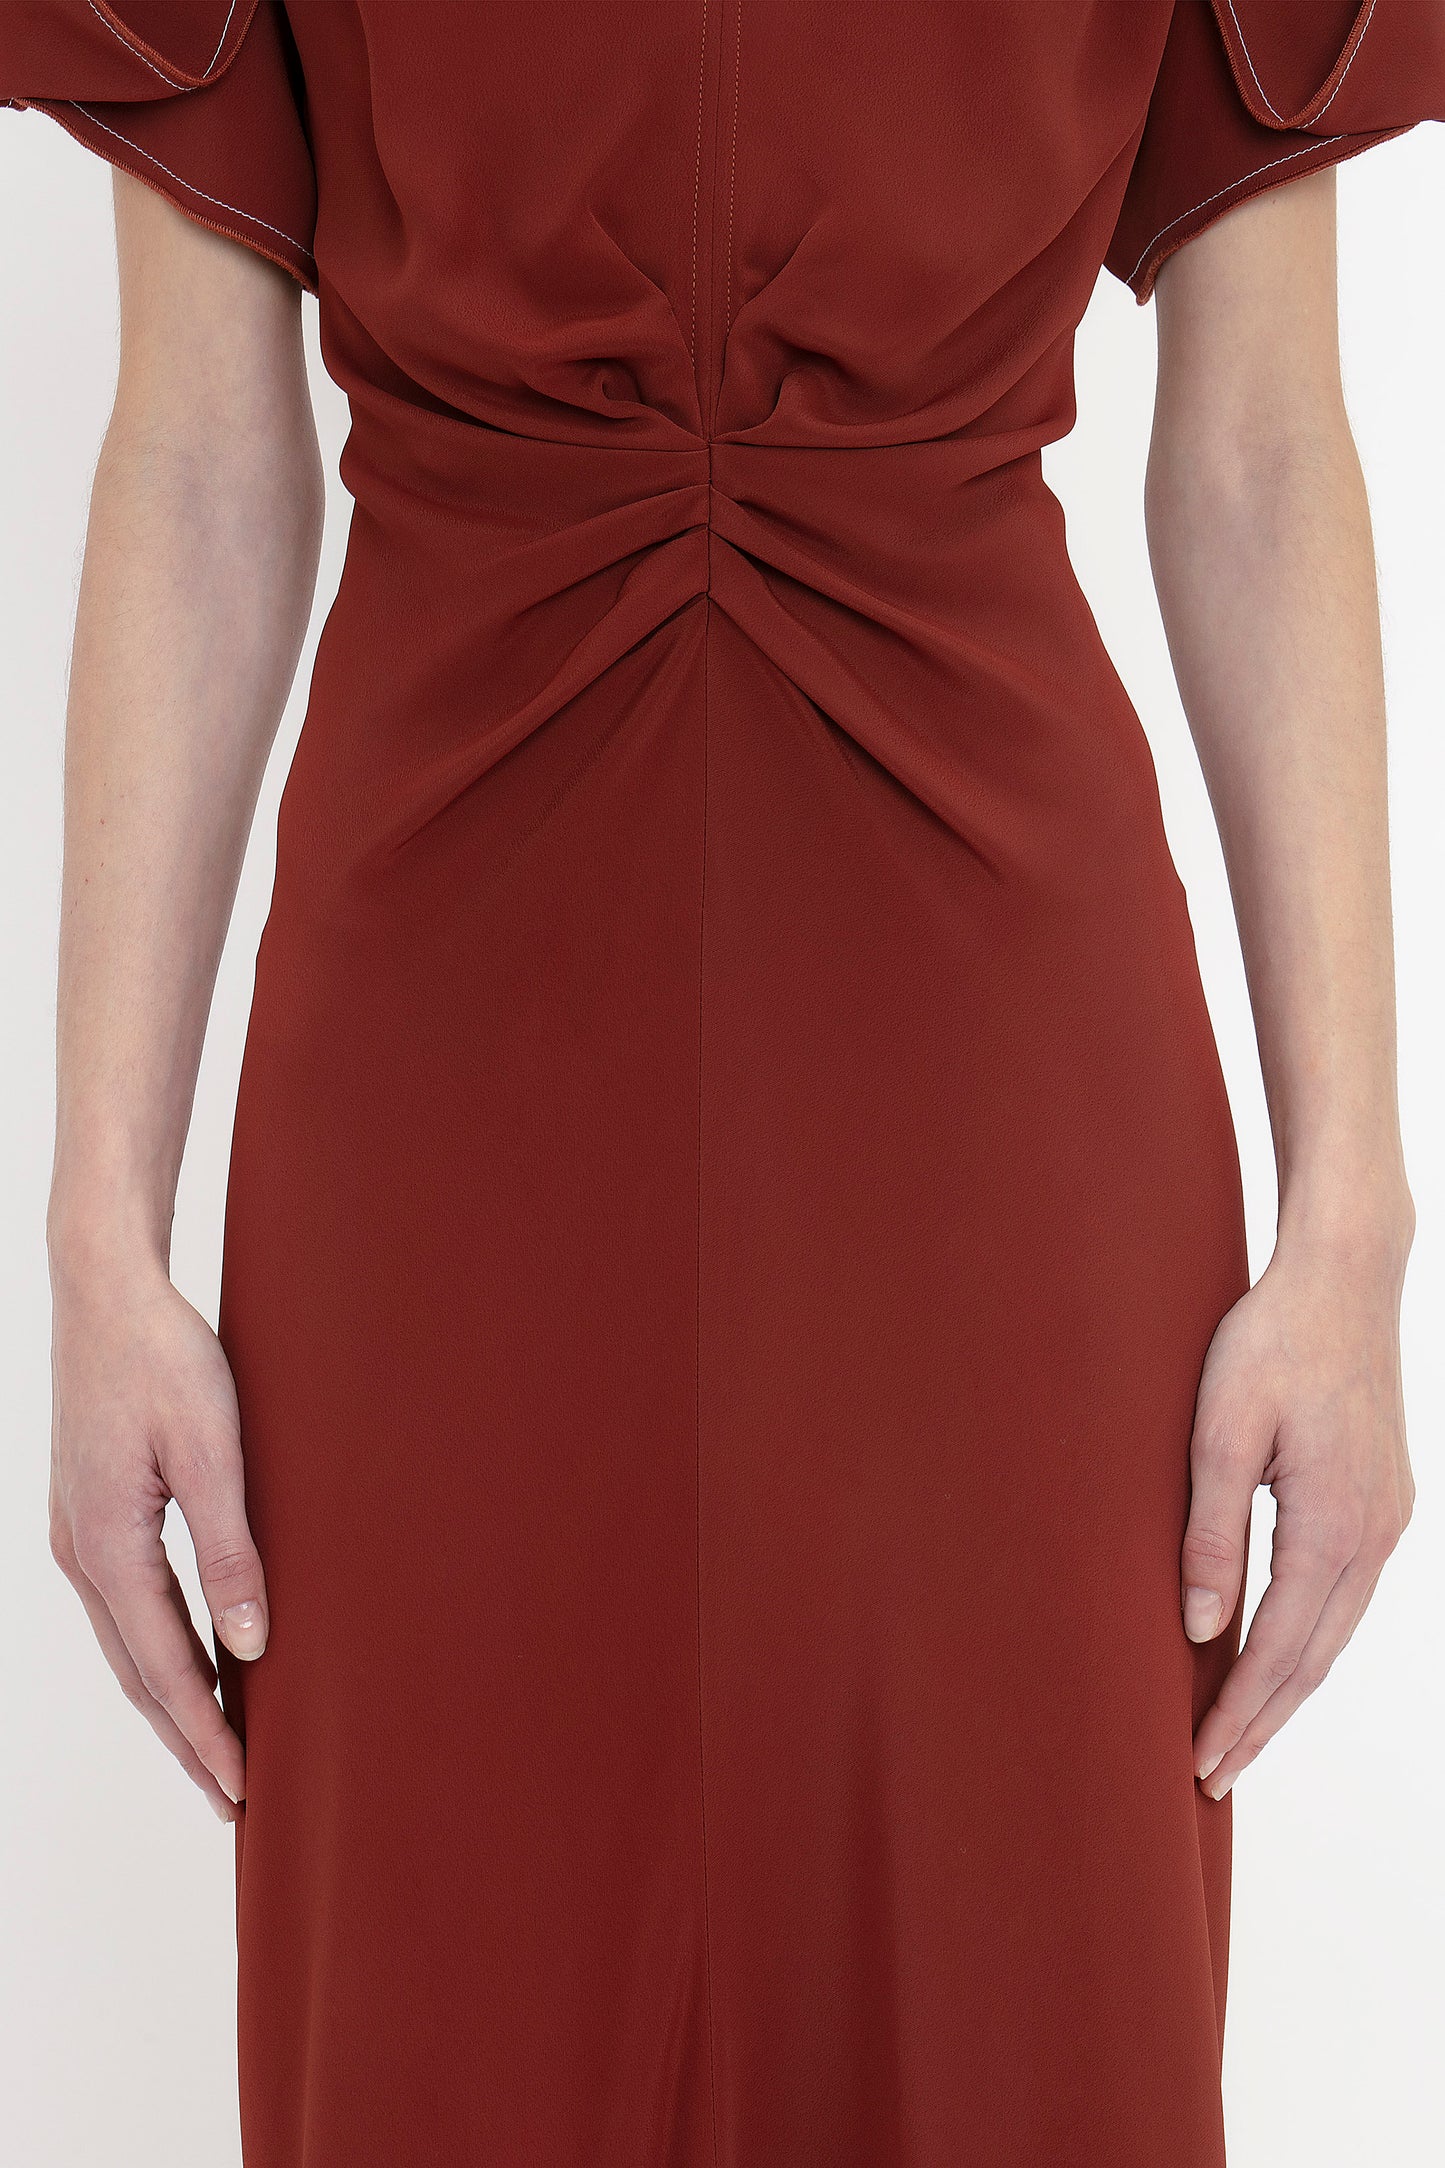 A person is wearing a rust-colored Gathered V-Neck Midi Dress In Russet by Victoria Beckham, with waist-defining pleat detail and slightly flared short sleeves, standing against a white background. Their hands are relaxed by their sides.